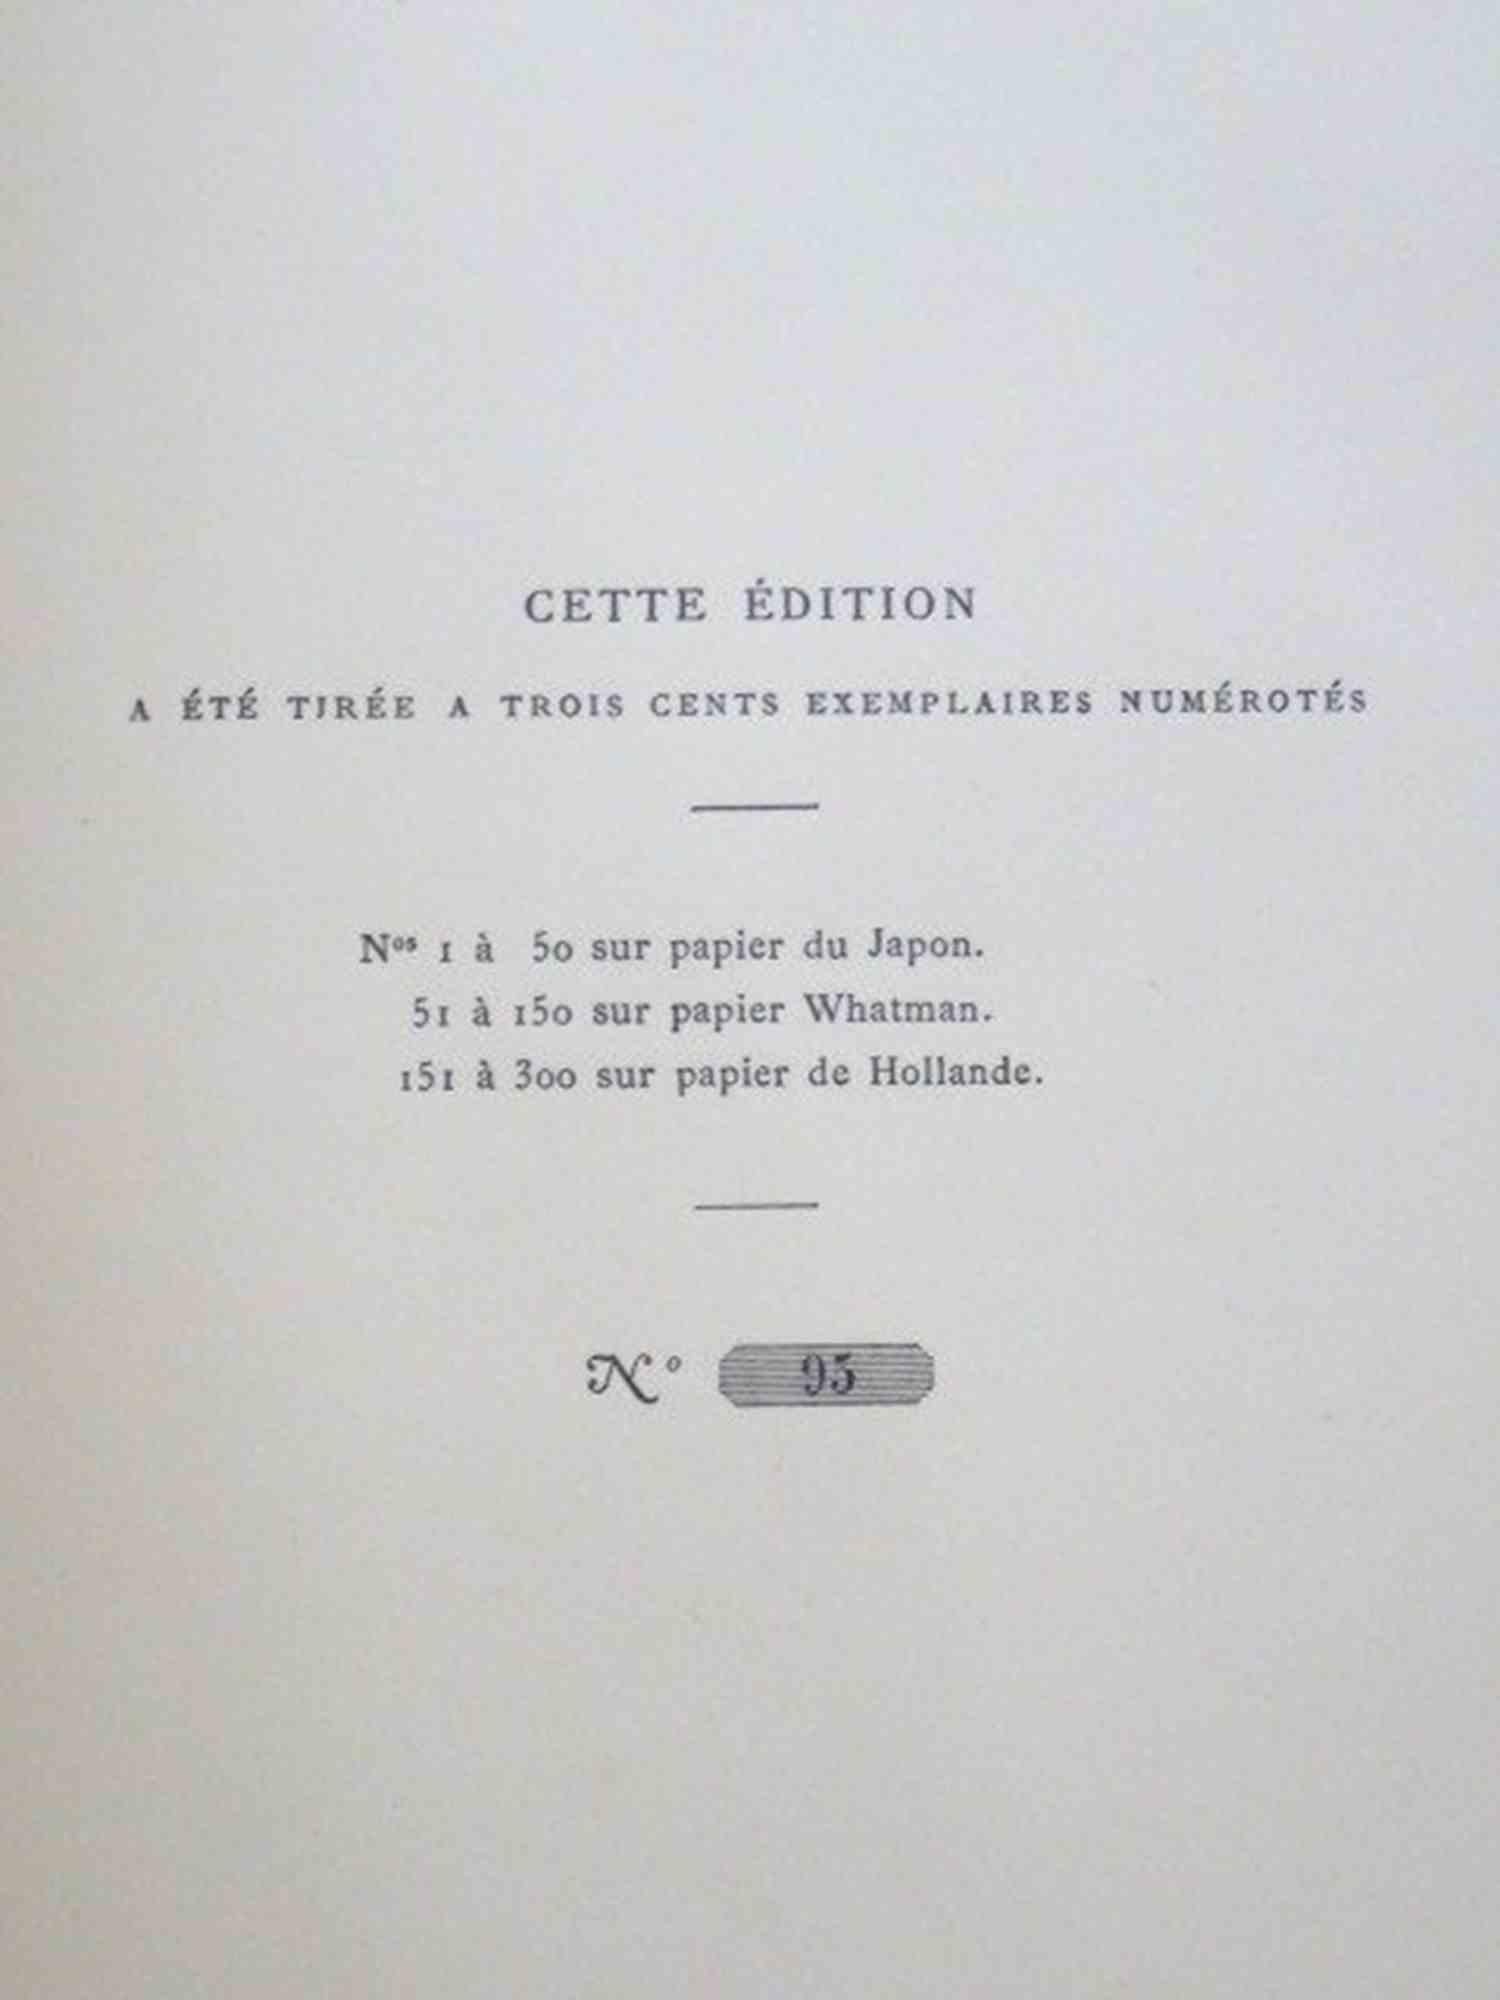 Le Pape - Rare Book by Victor Hugo - 1885 For Sale 7